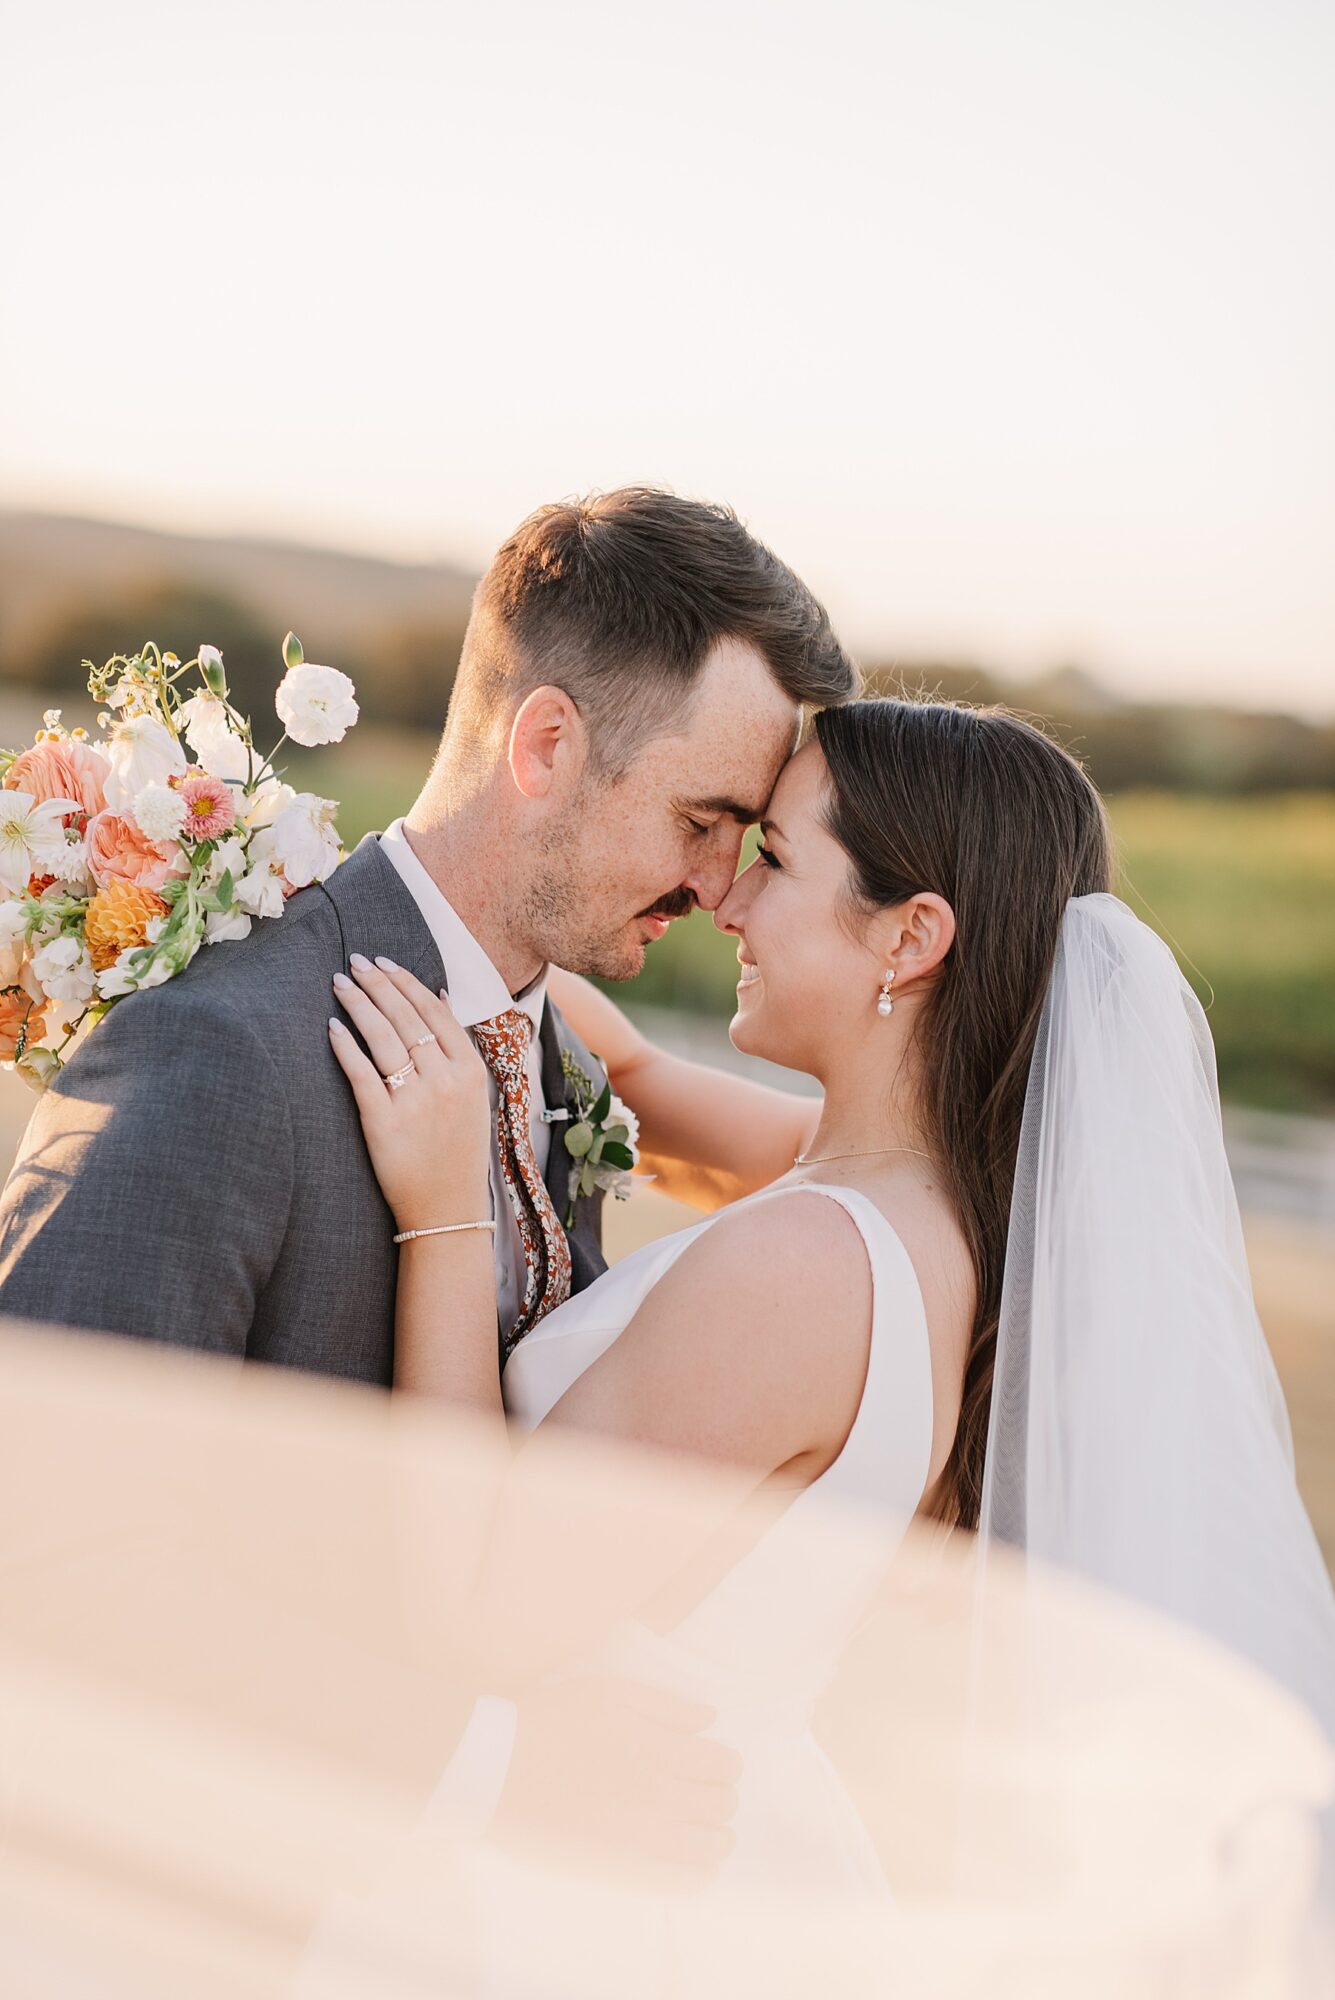 Nikkels Photography, a Paso Robles Destination Photographer, shares inspiration for an autumn Private Estate Wedding in Paso Robles, CA